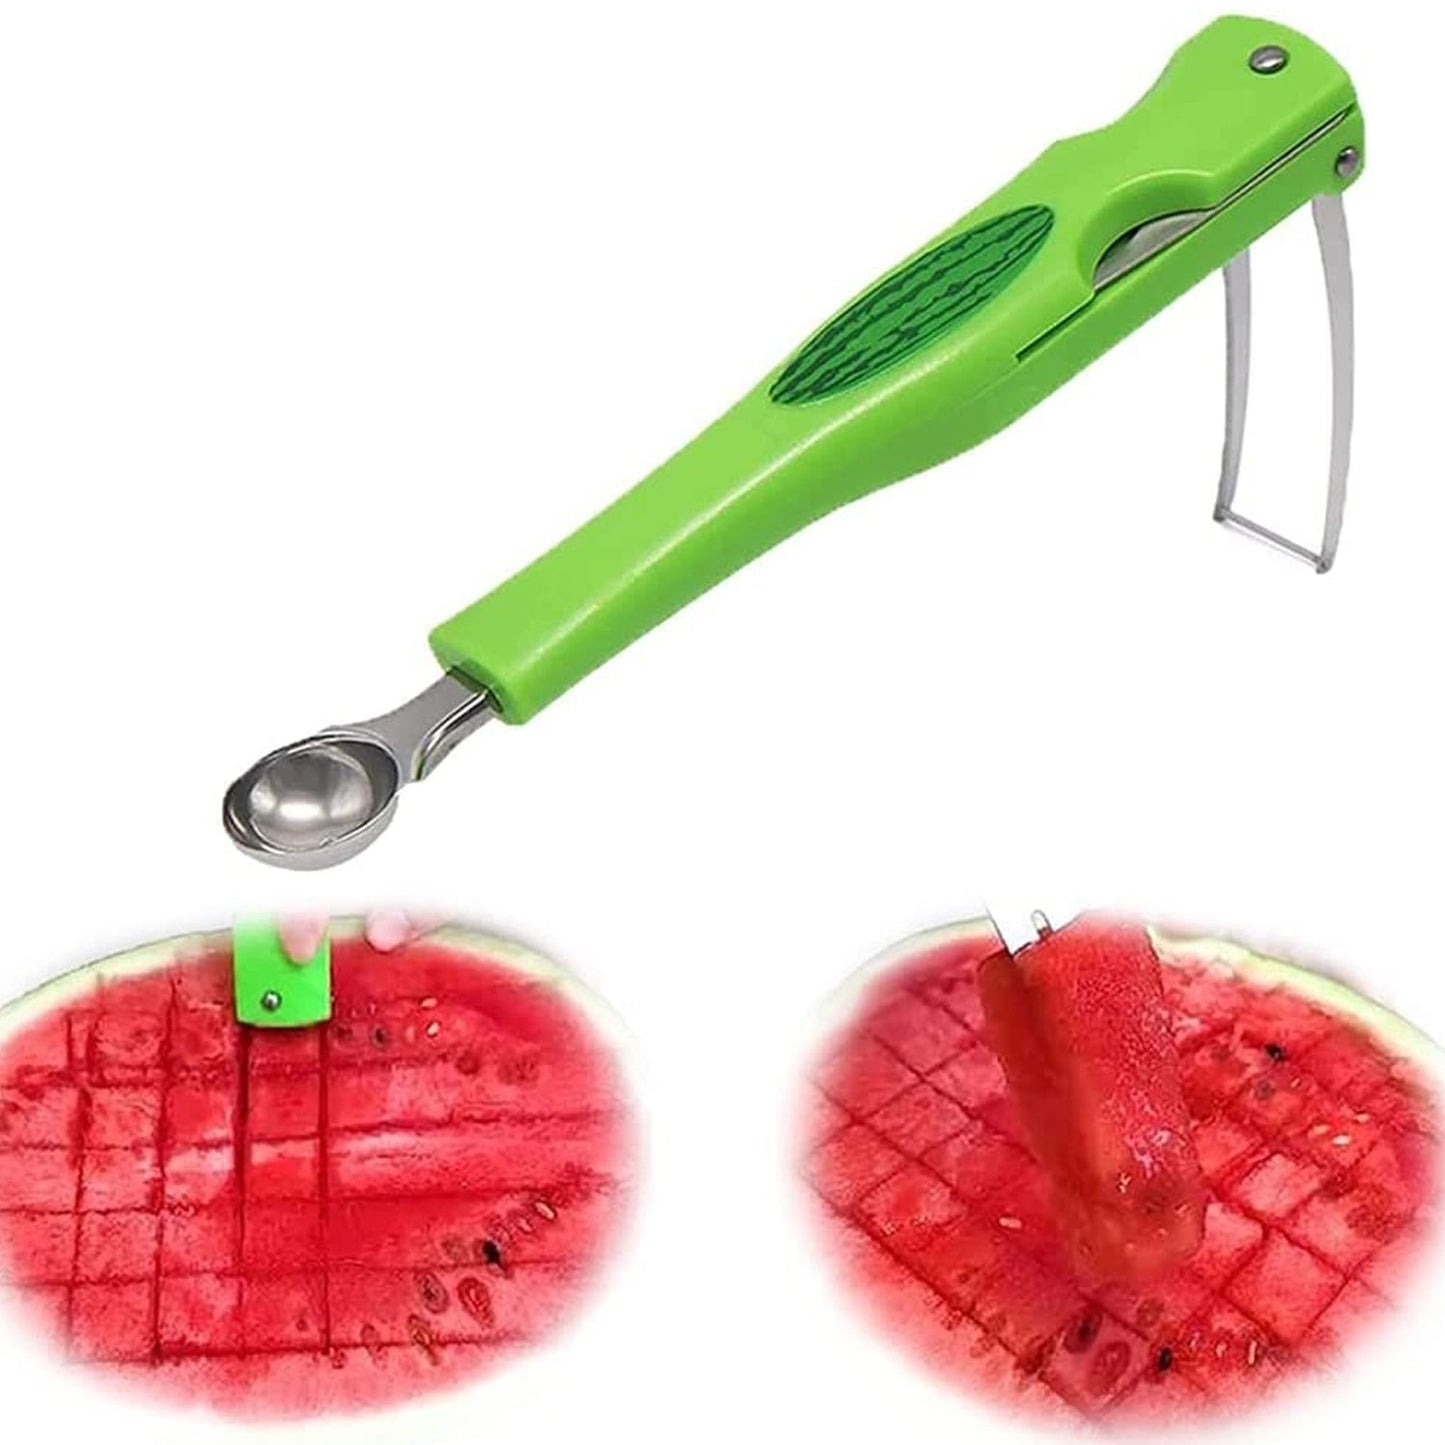 Stainless Steel Fruit Scooper Seed Remover Melon Baller Carving Knife Double Sided Melon Baller for Watermelon Ice Cream